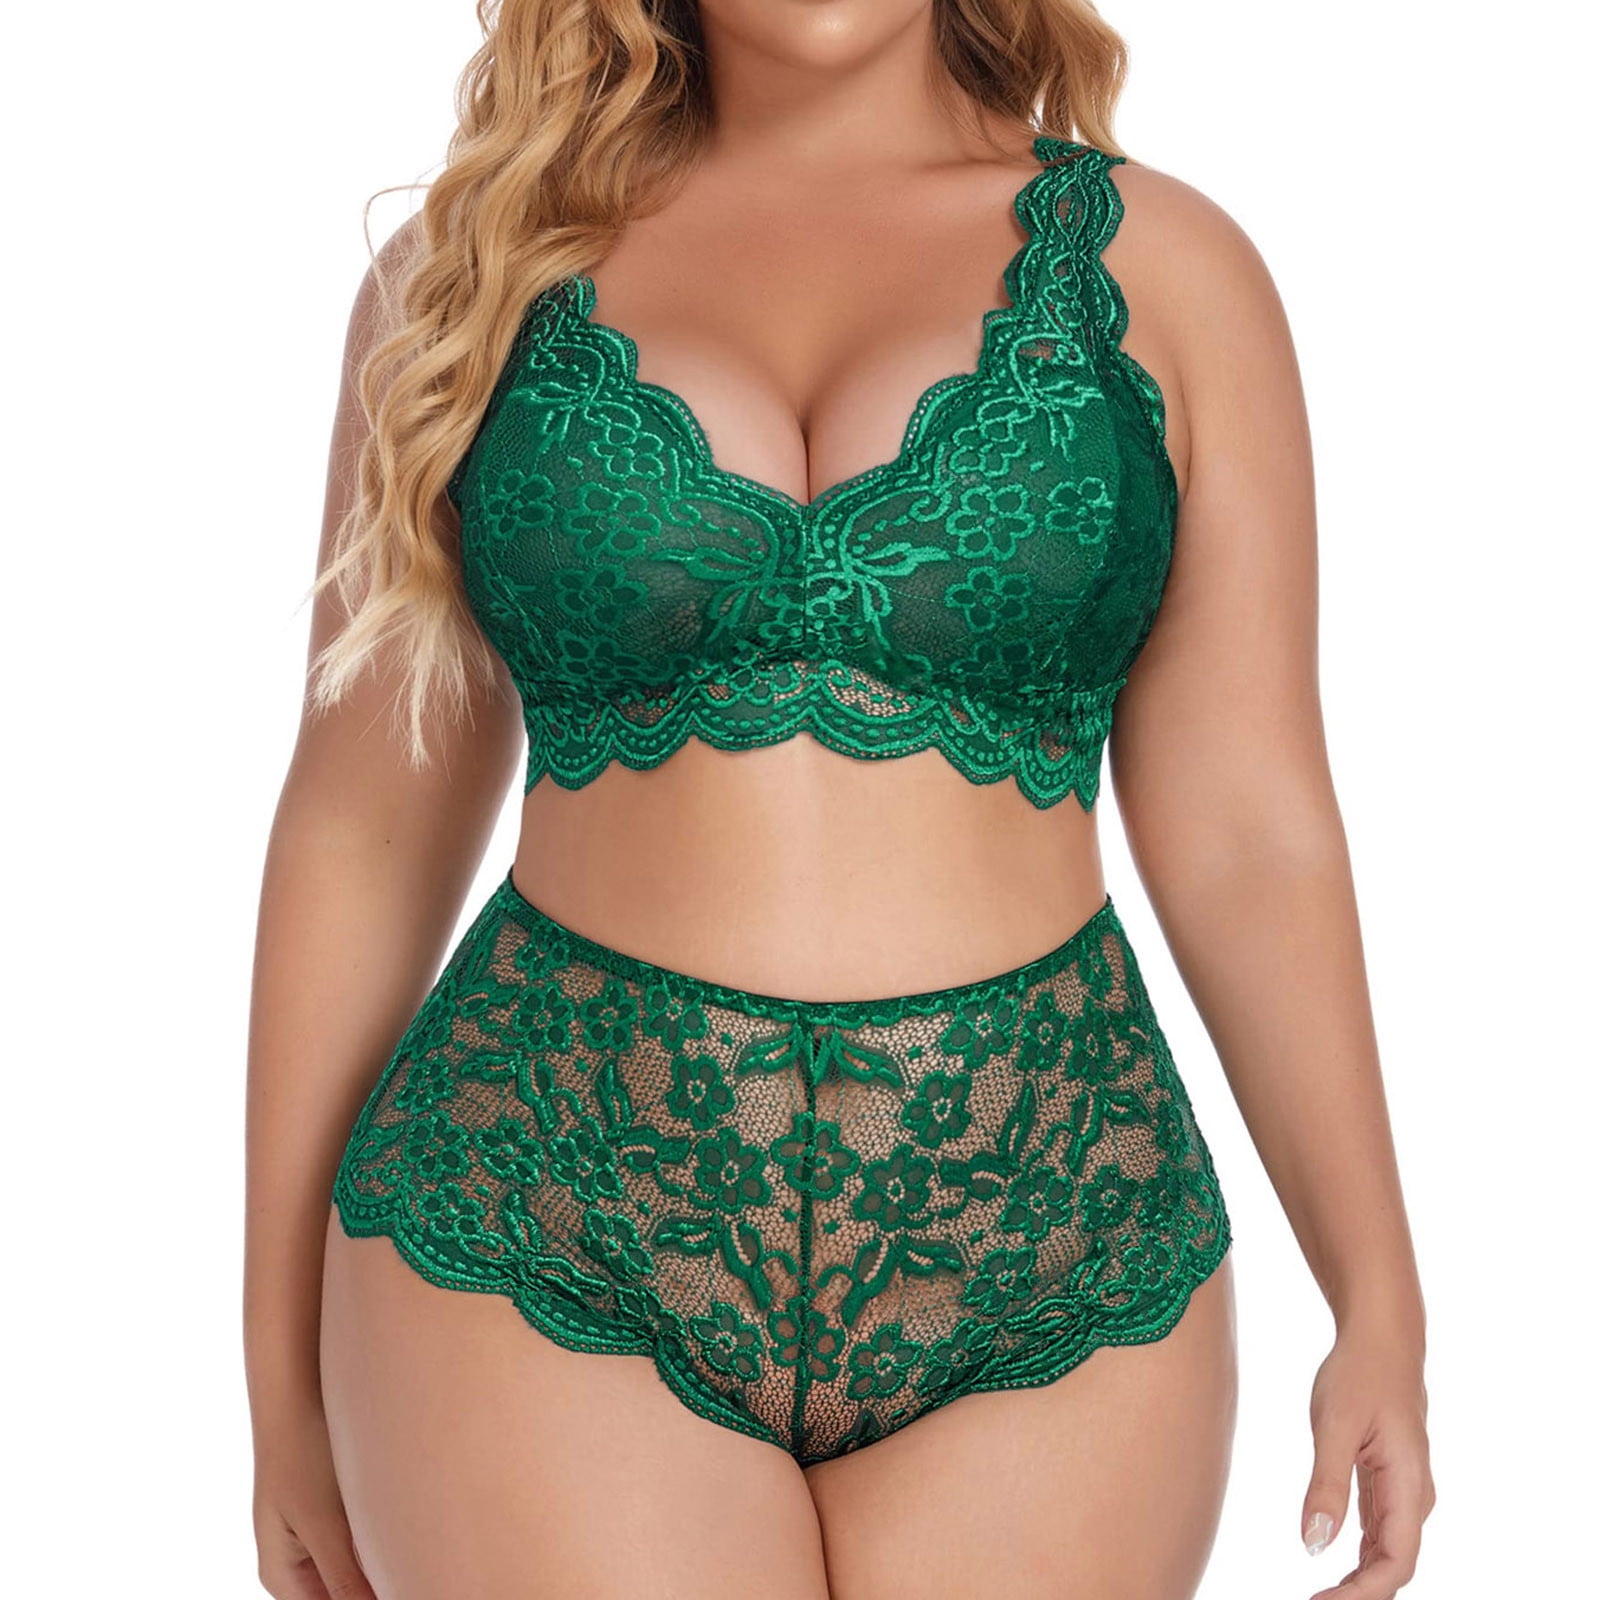 Vedolay Bra And Panty Sets Plus Size 2 Piece Lingerie for Women Strappy Bra  and Panty Underwear Sets Lace Underwear Set for Women(Green,M) 